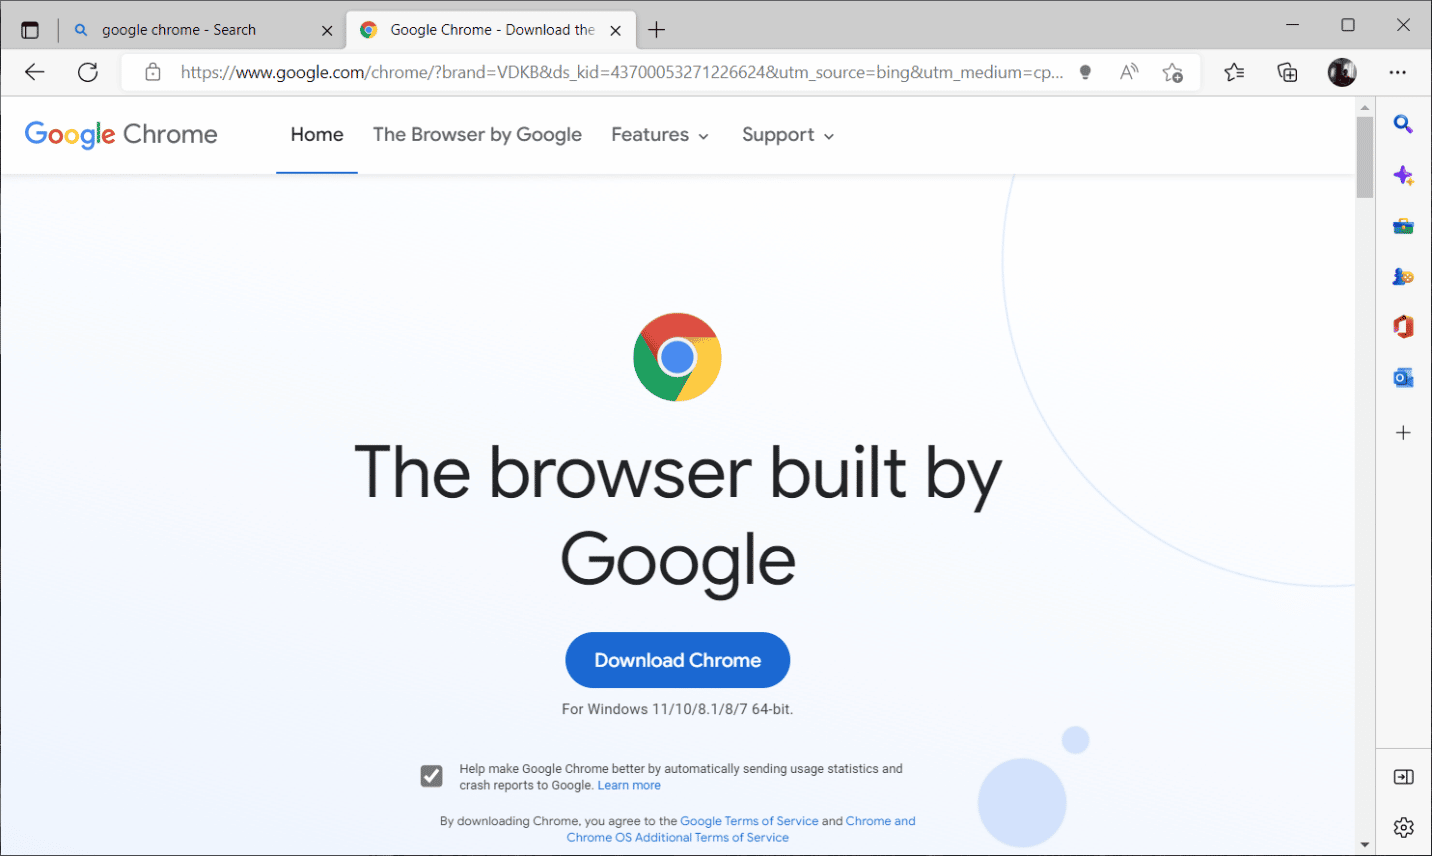 Download Google Chrome using a different default browser